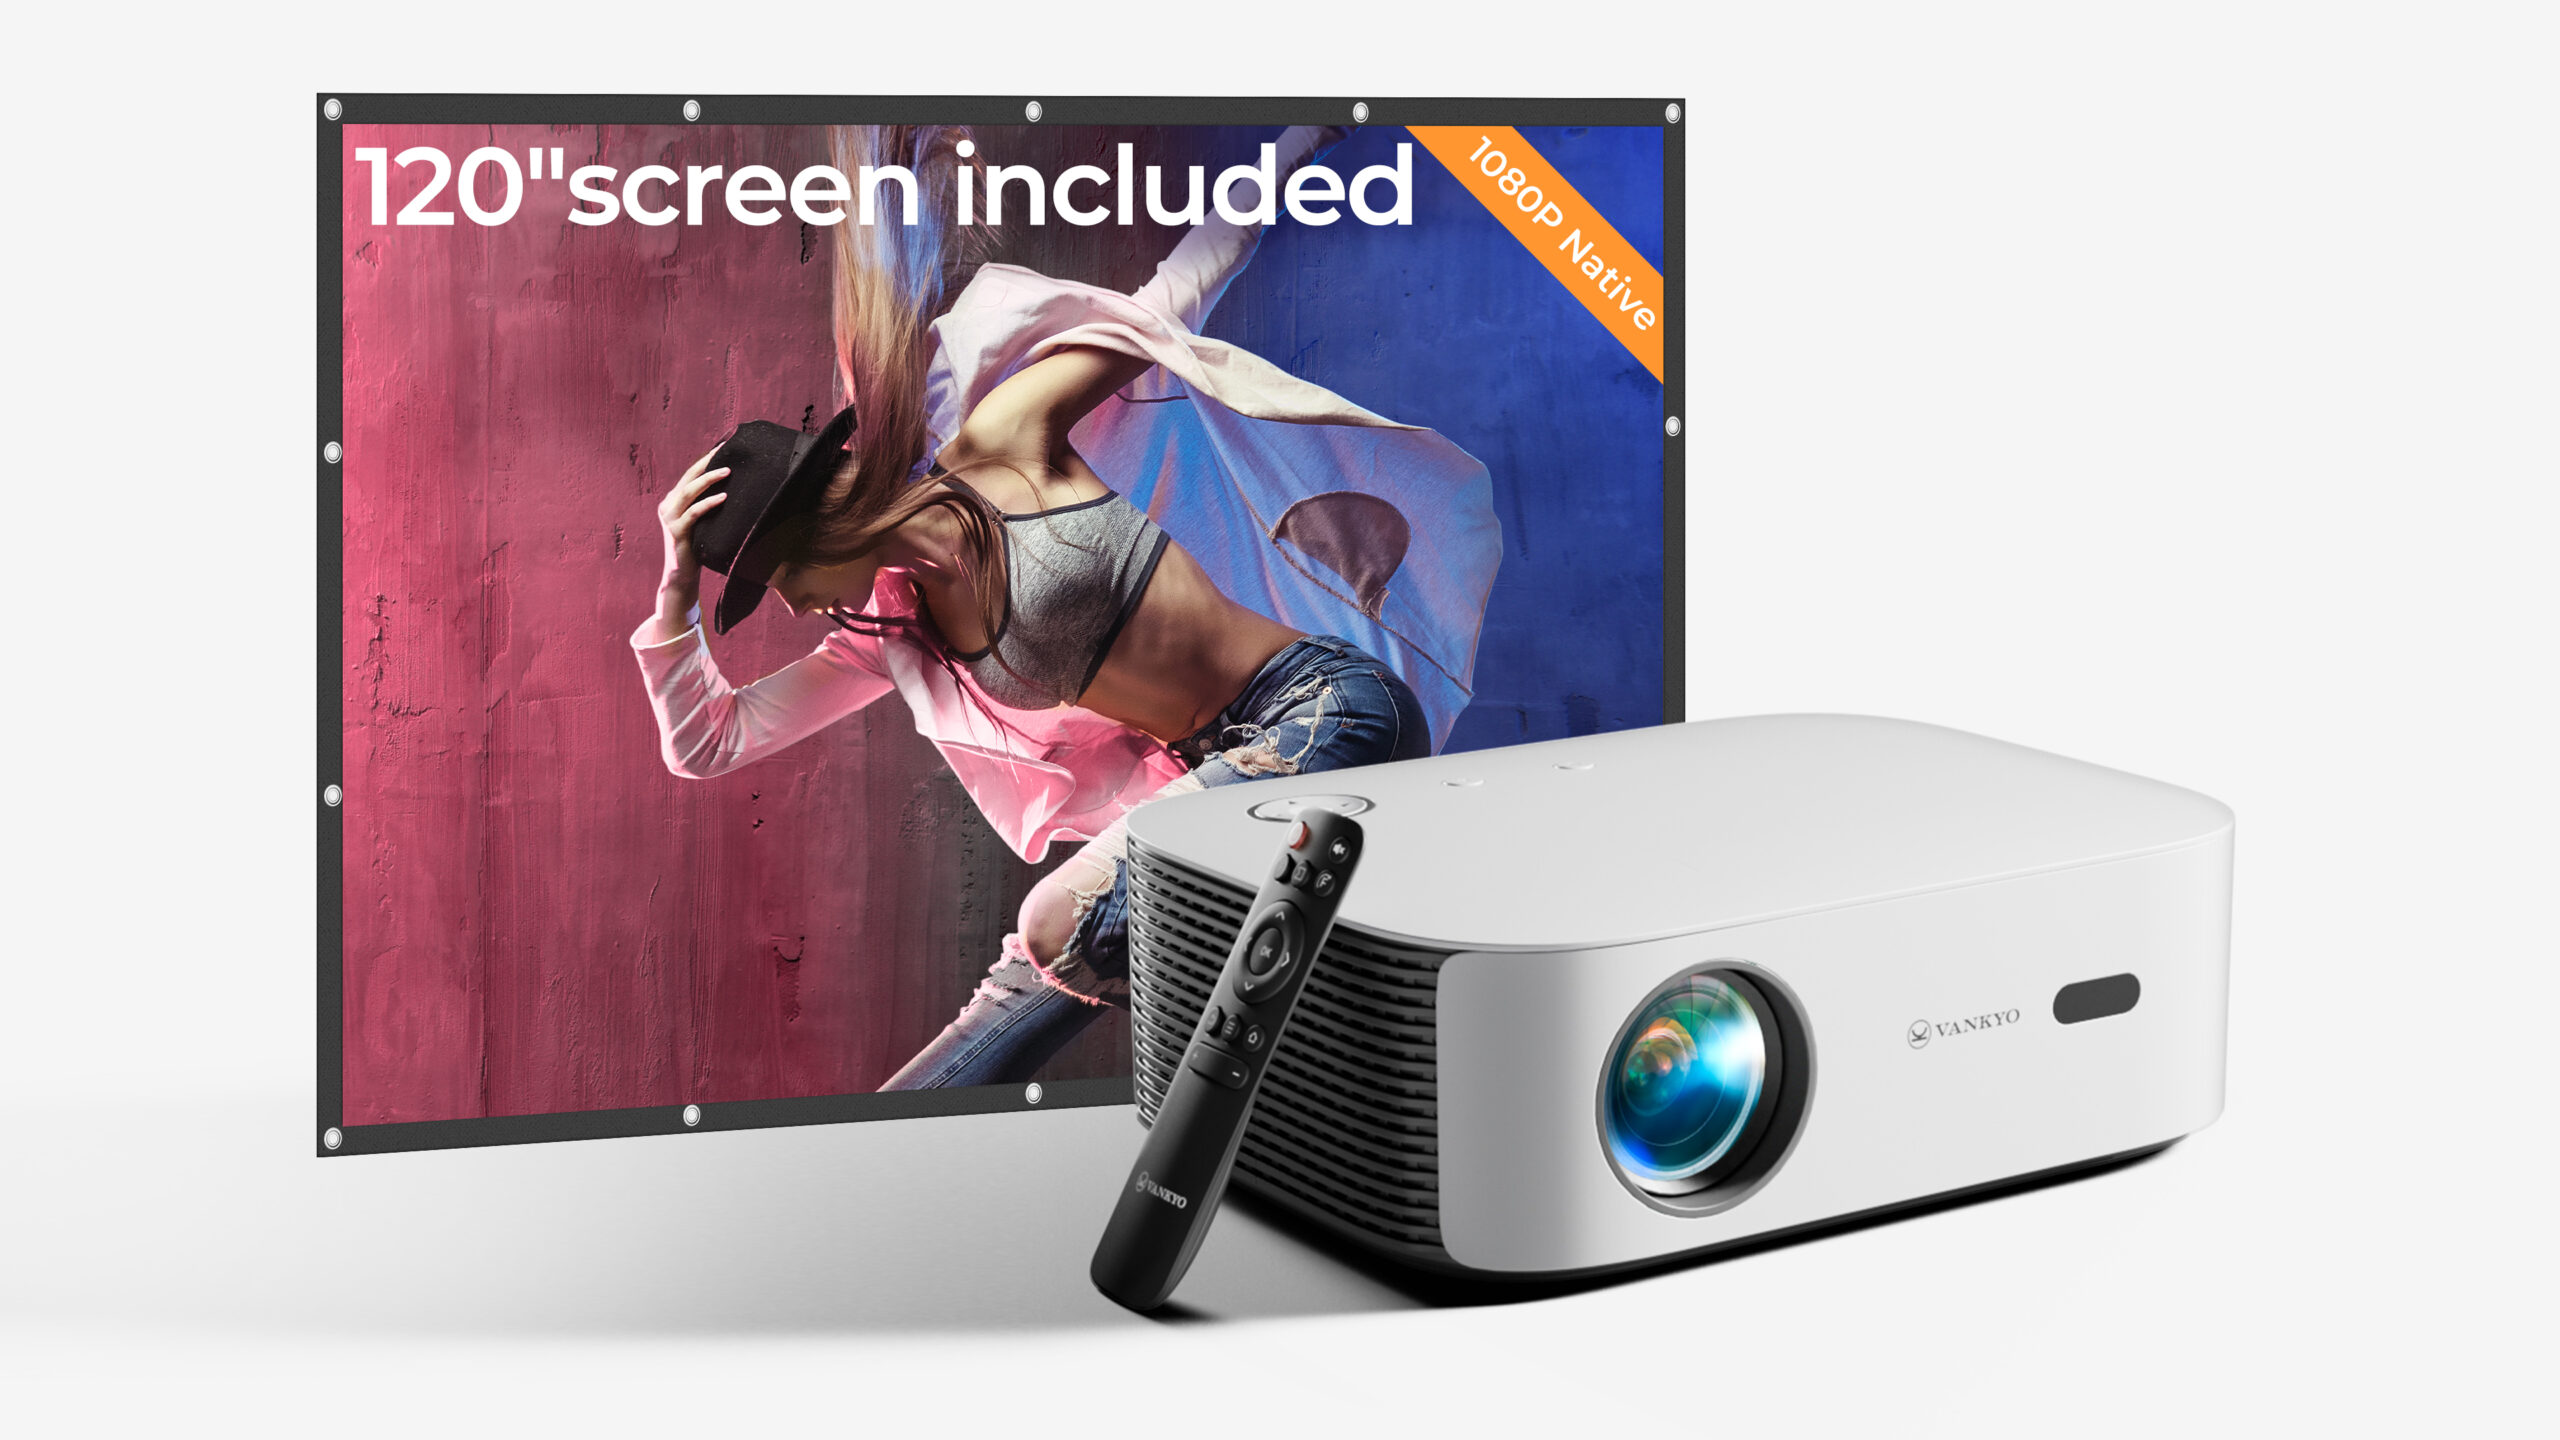 Give Vankyo’s Performance V700W HD Projector as a holiday gift